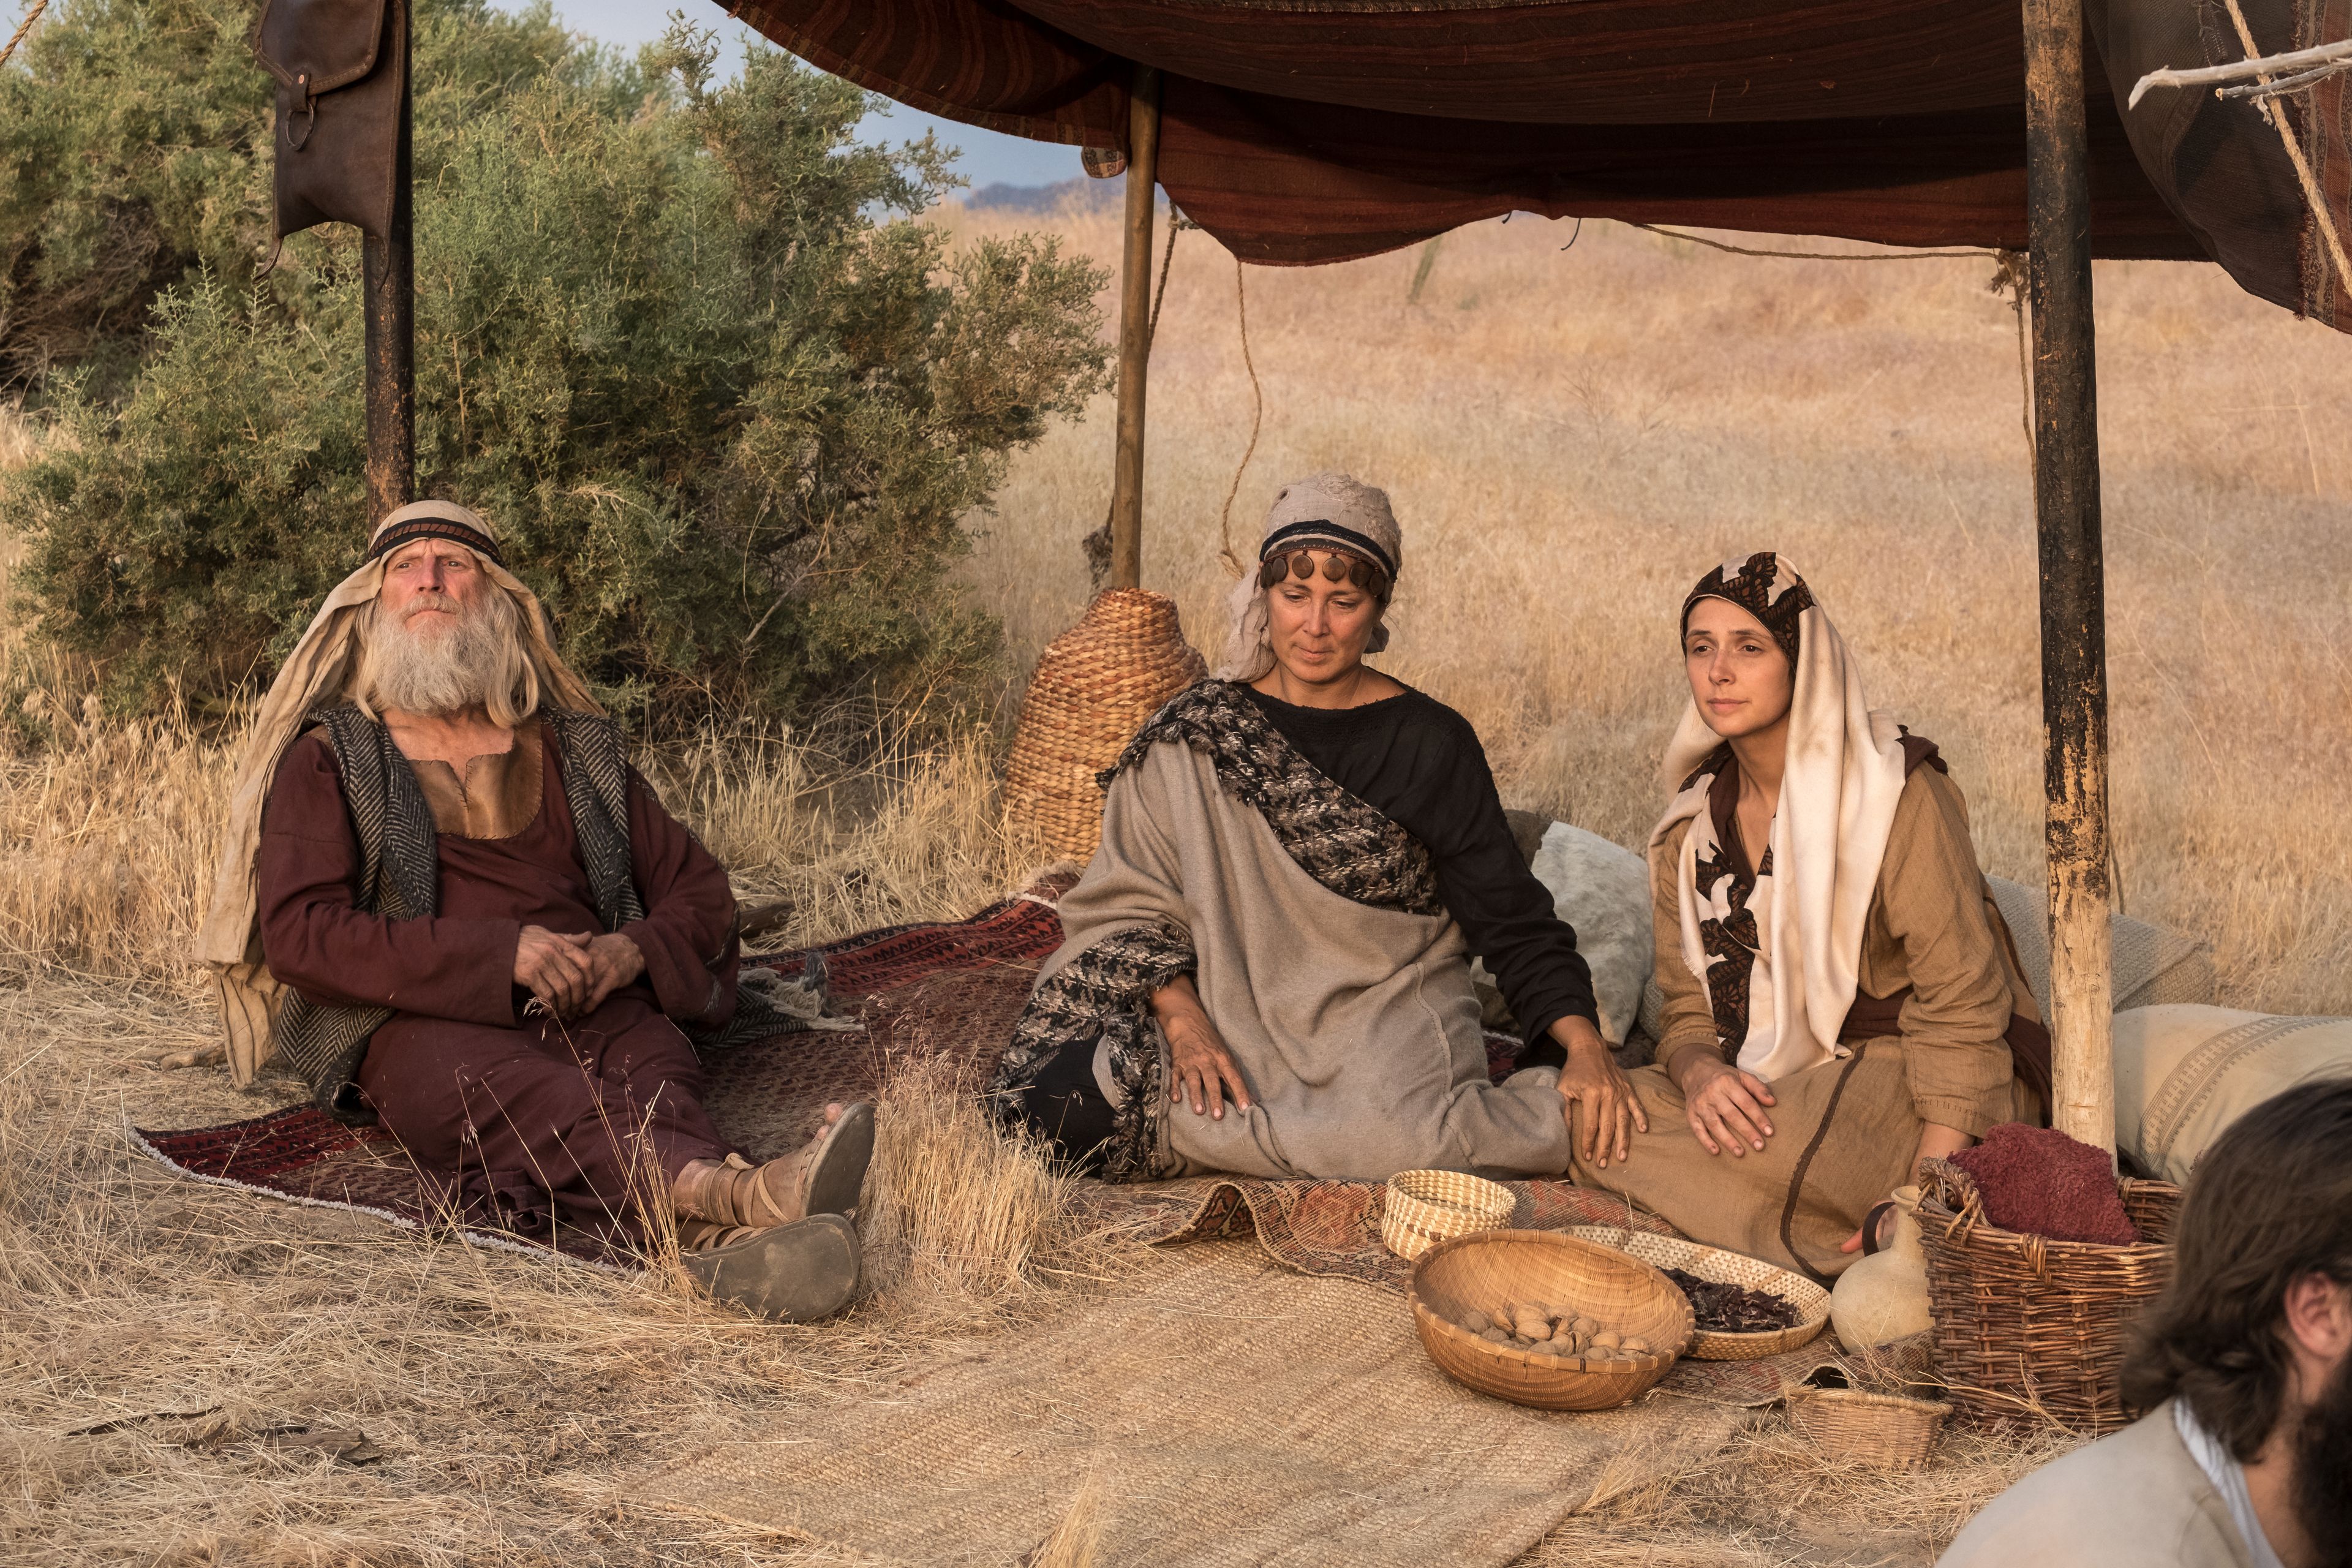 Ishmael, his wife, and his daughter sit in a tent in the wilderness.